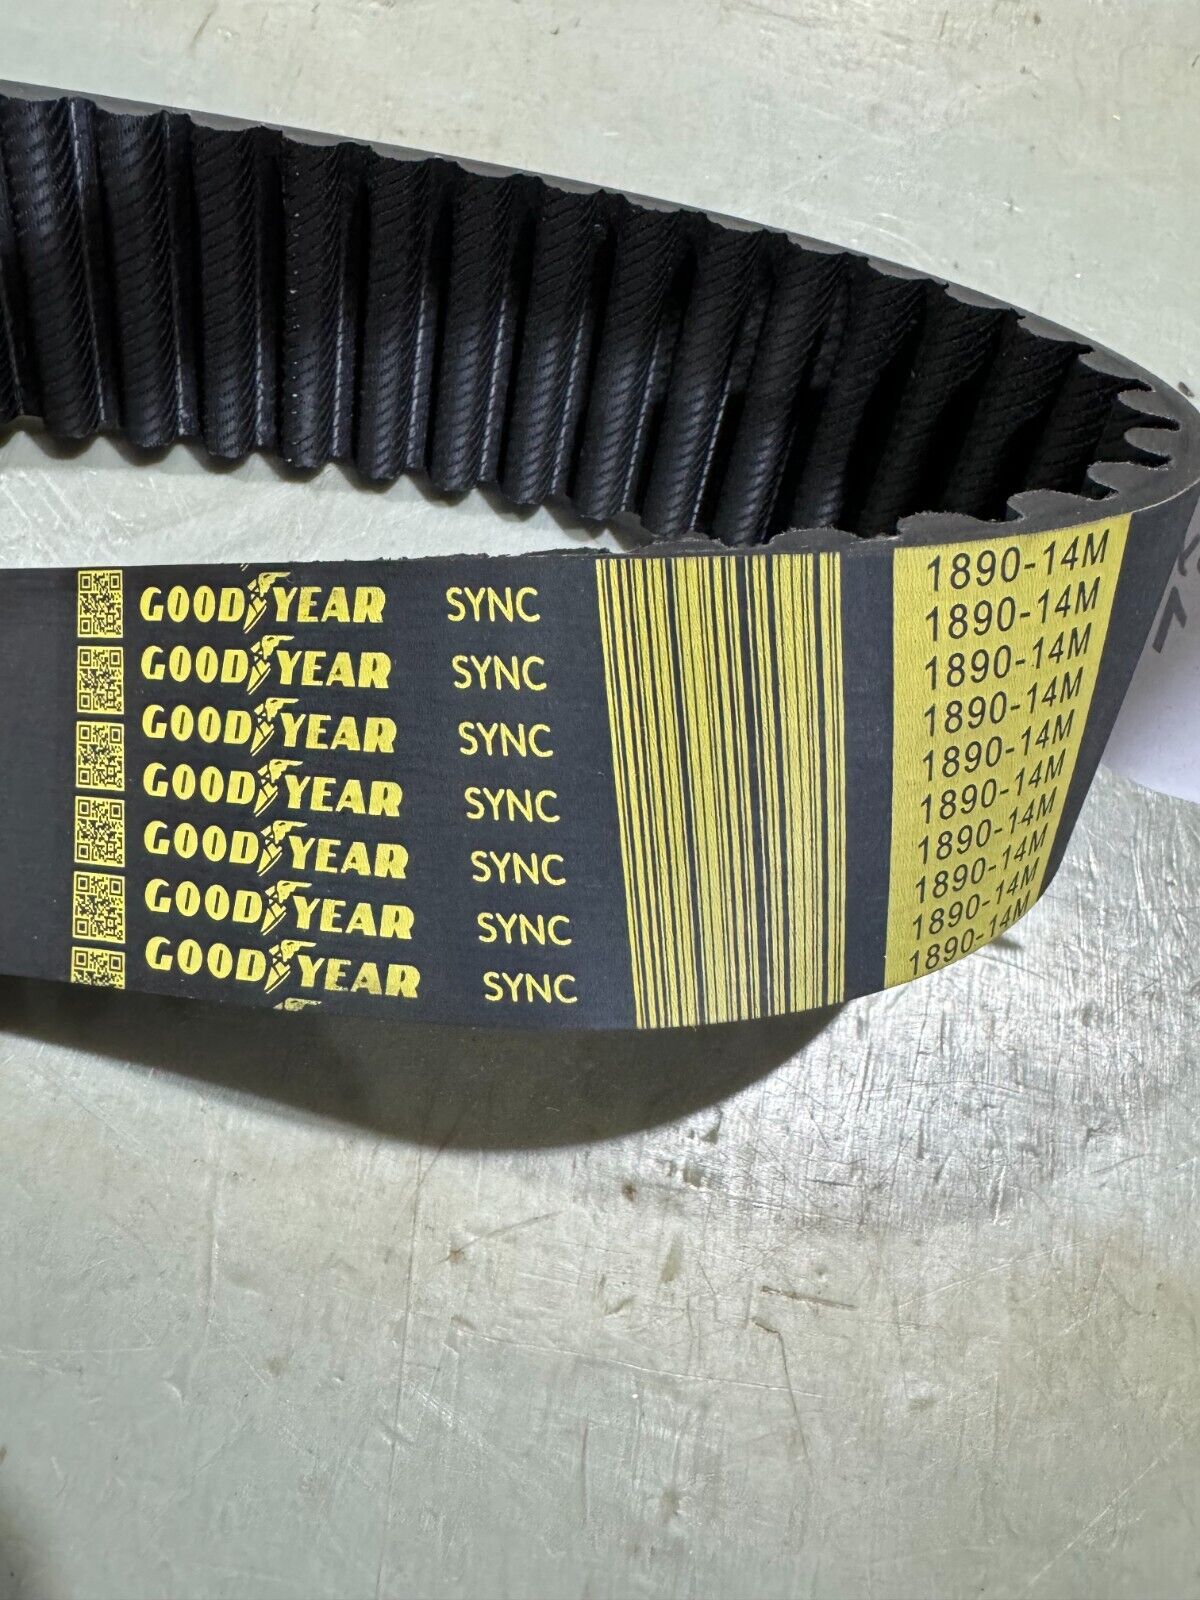 FACTORY NEW GOODYEAR SYNCHRONOUS Sync HTD TIMING BELT 1890-14M-55